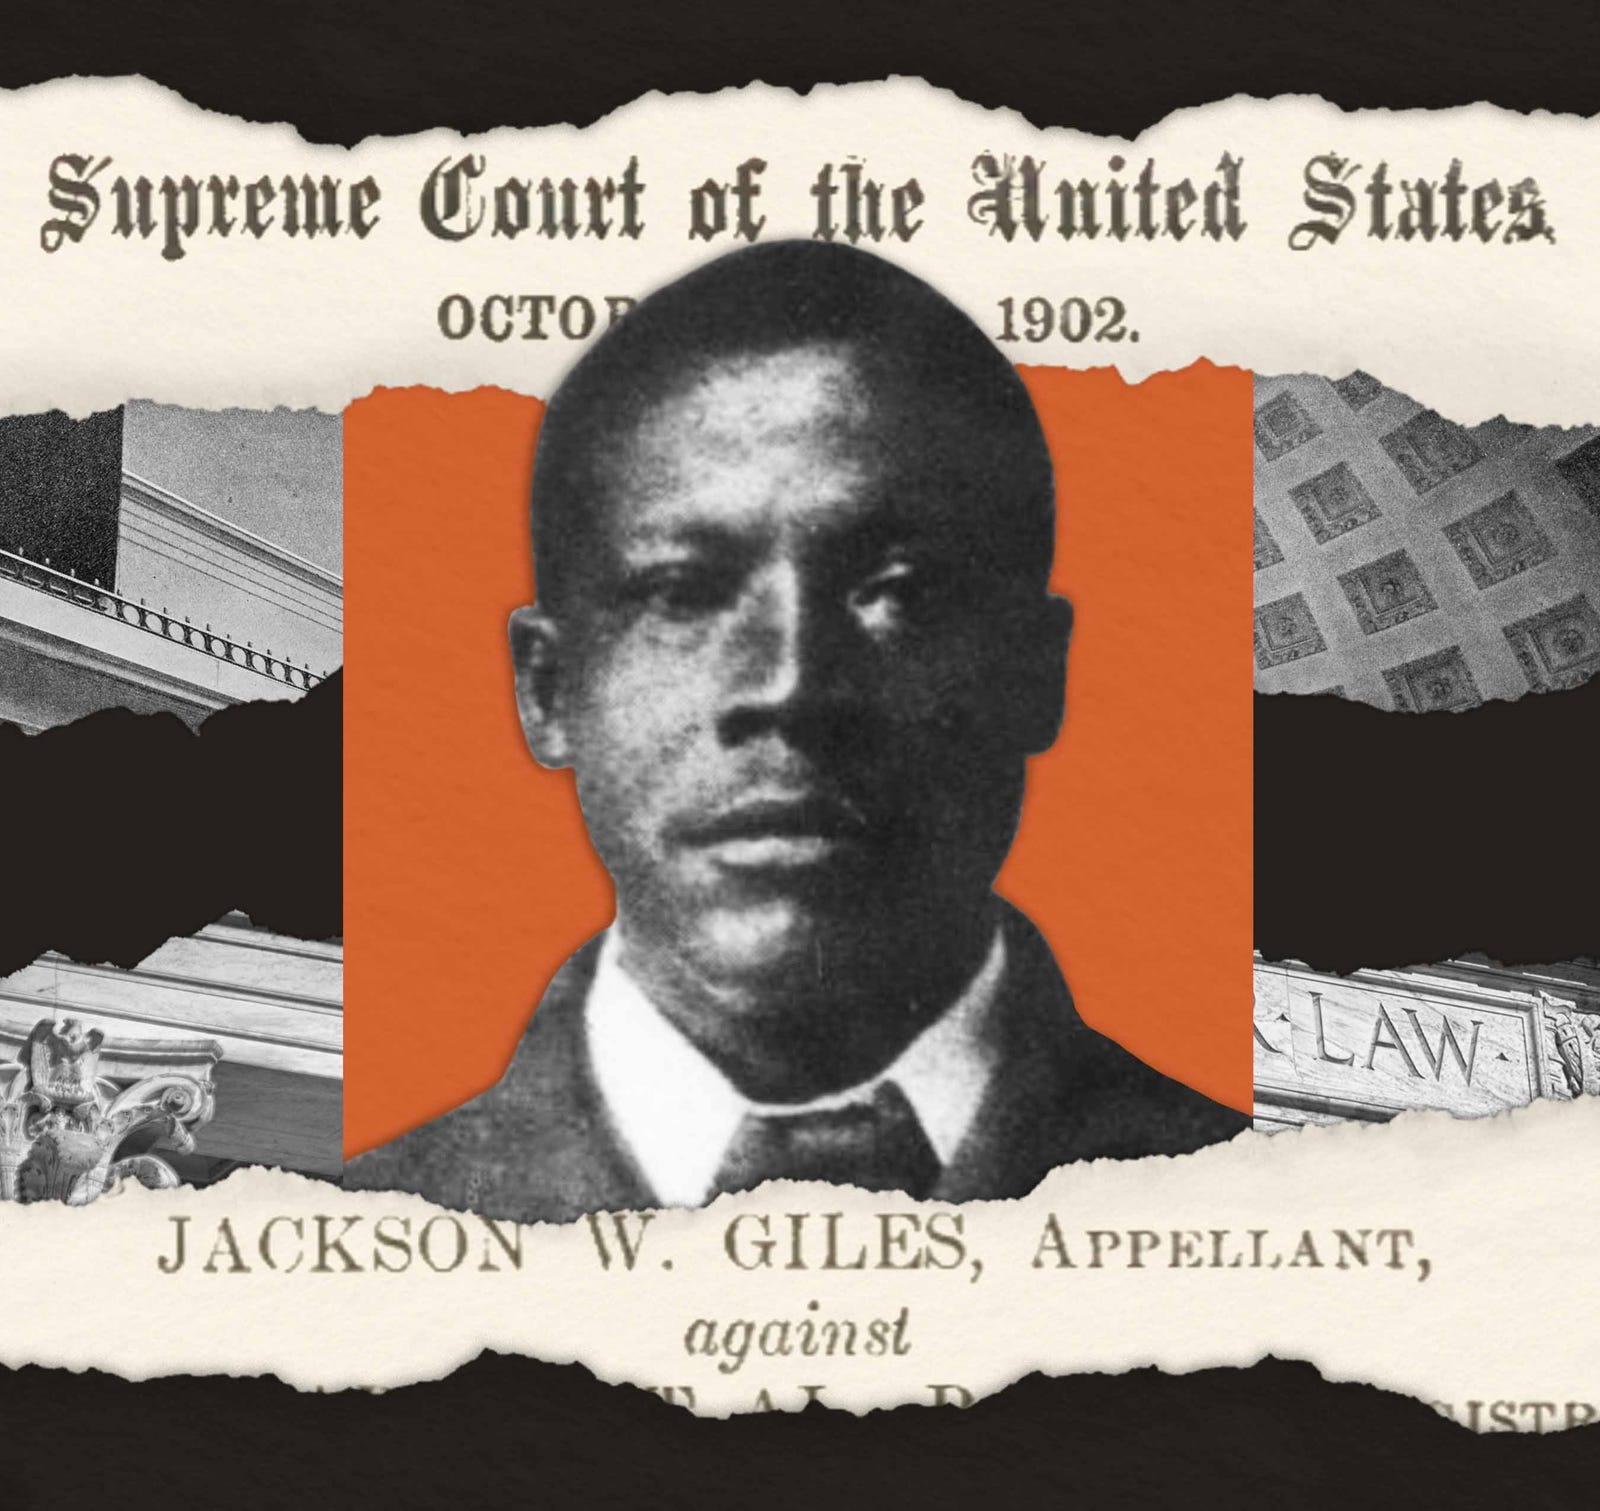 Jim Crow Alabama was challenged by a postal worker named Jackson Giles